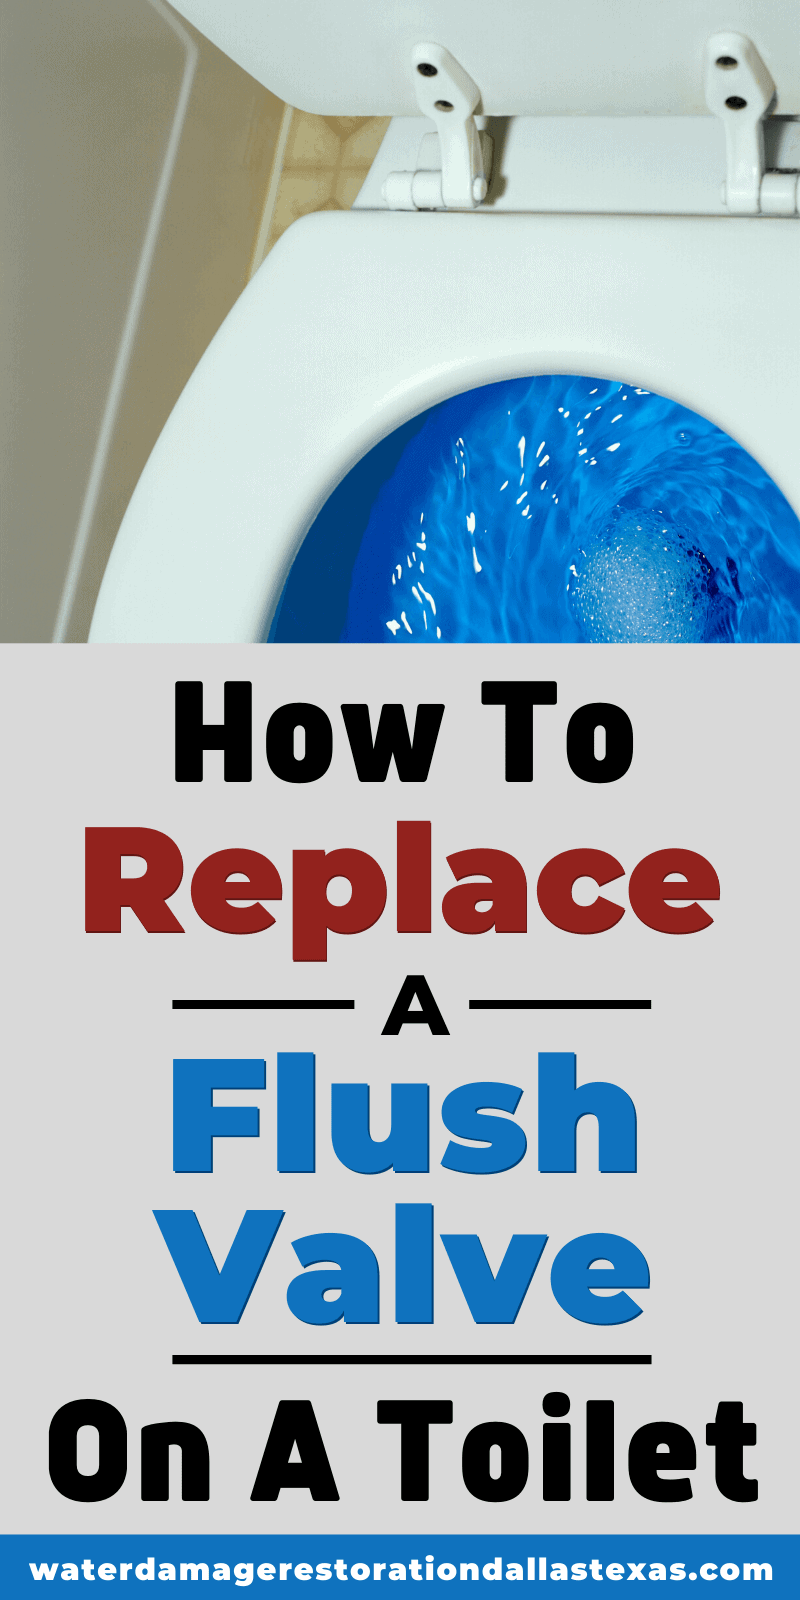 Replacing a flush valve dont have to be hard and you dont need a plumber to do it. waterdamagerestorationdallastexas will show you the steps to take to replace a flush valve. 